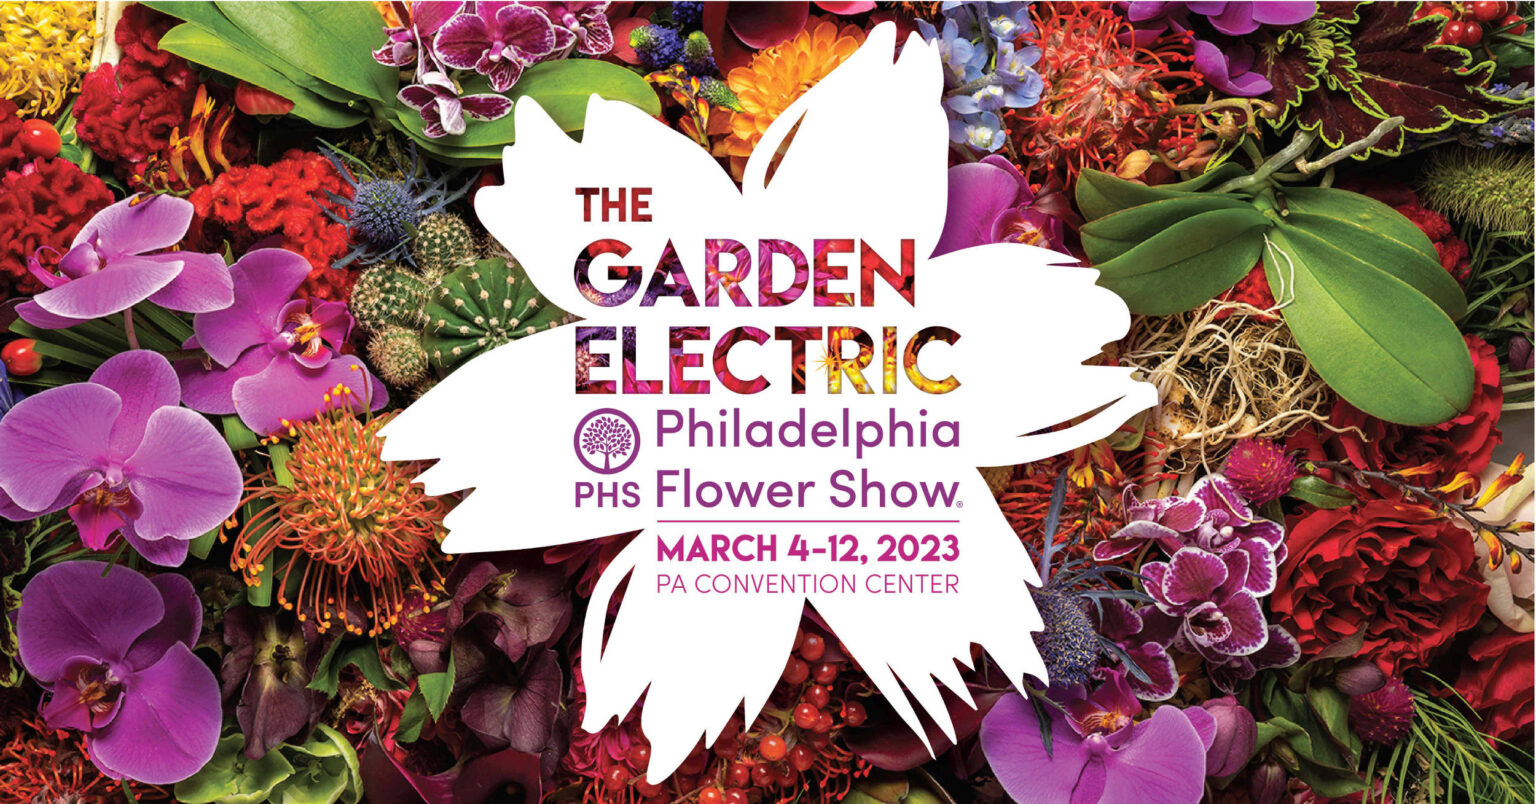 2023 Philadelphia Flower Show Is Back Inside, and the Theme Is “The